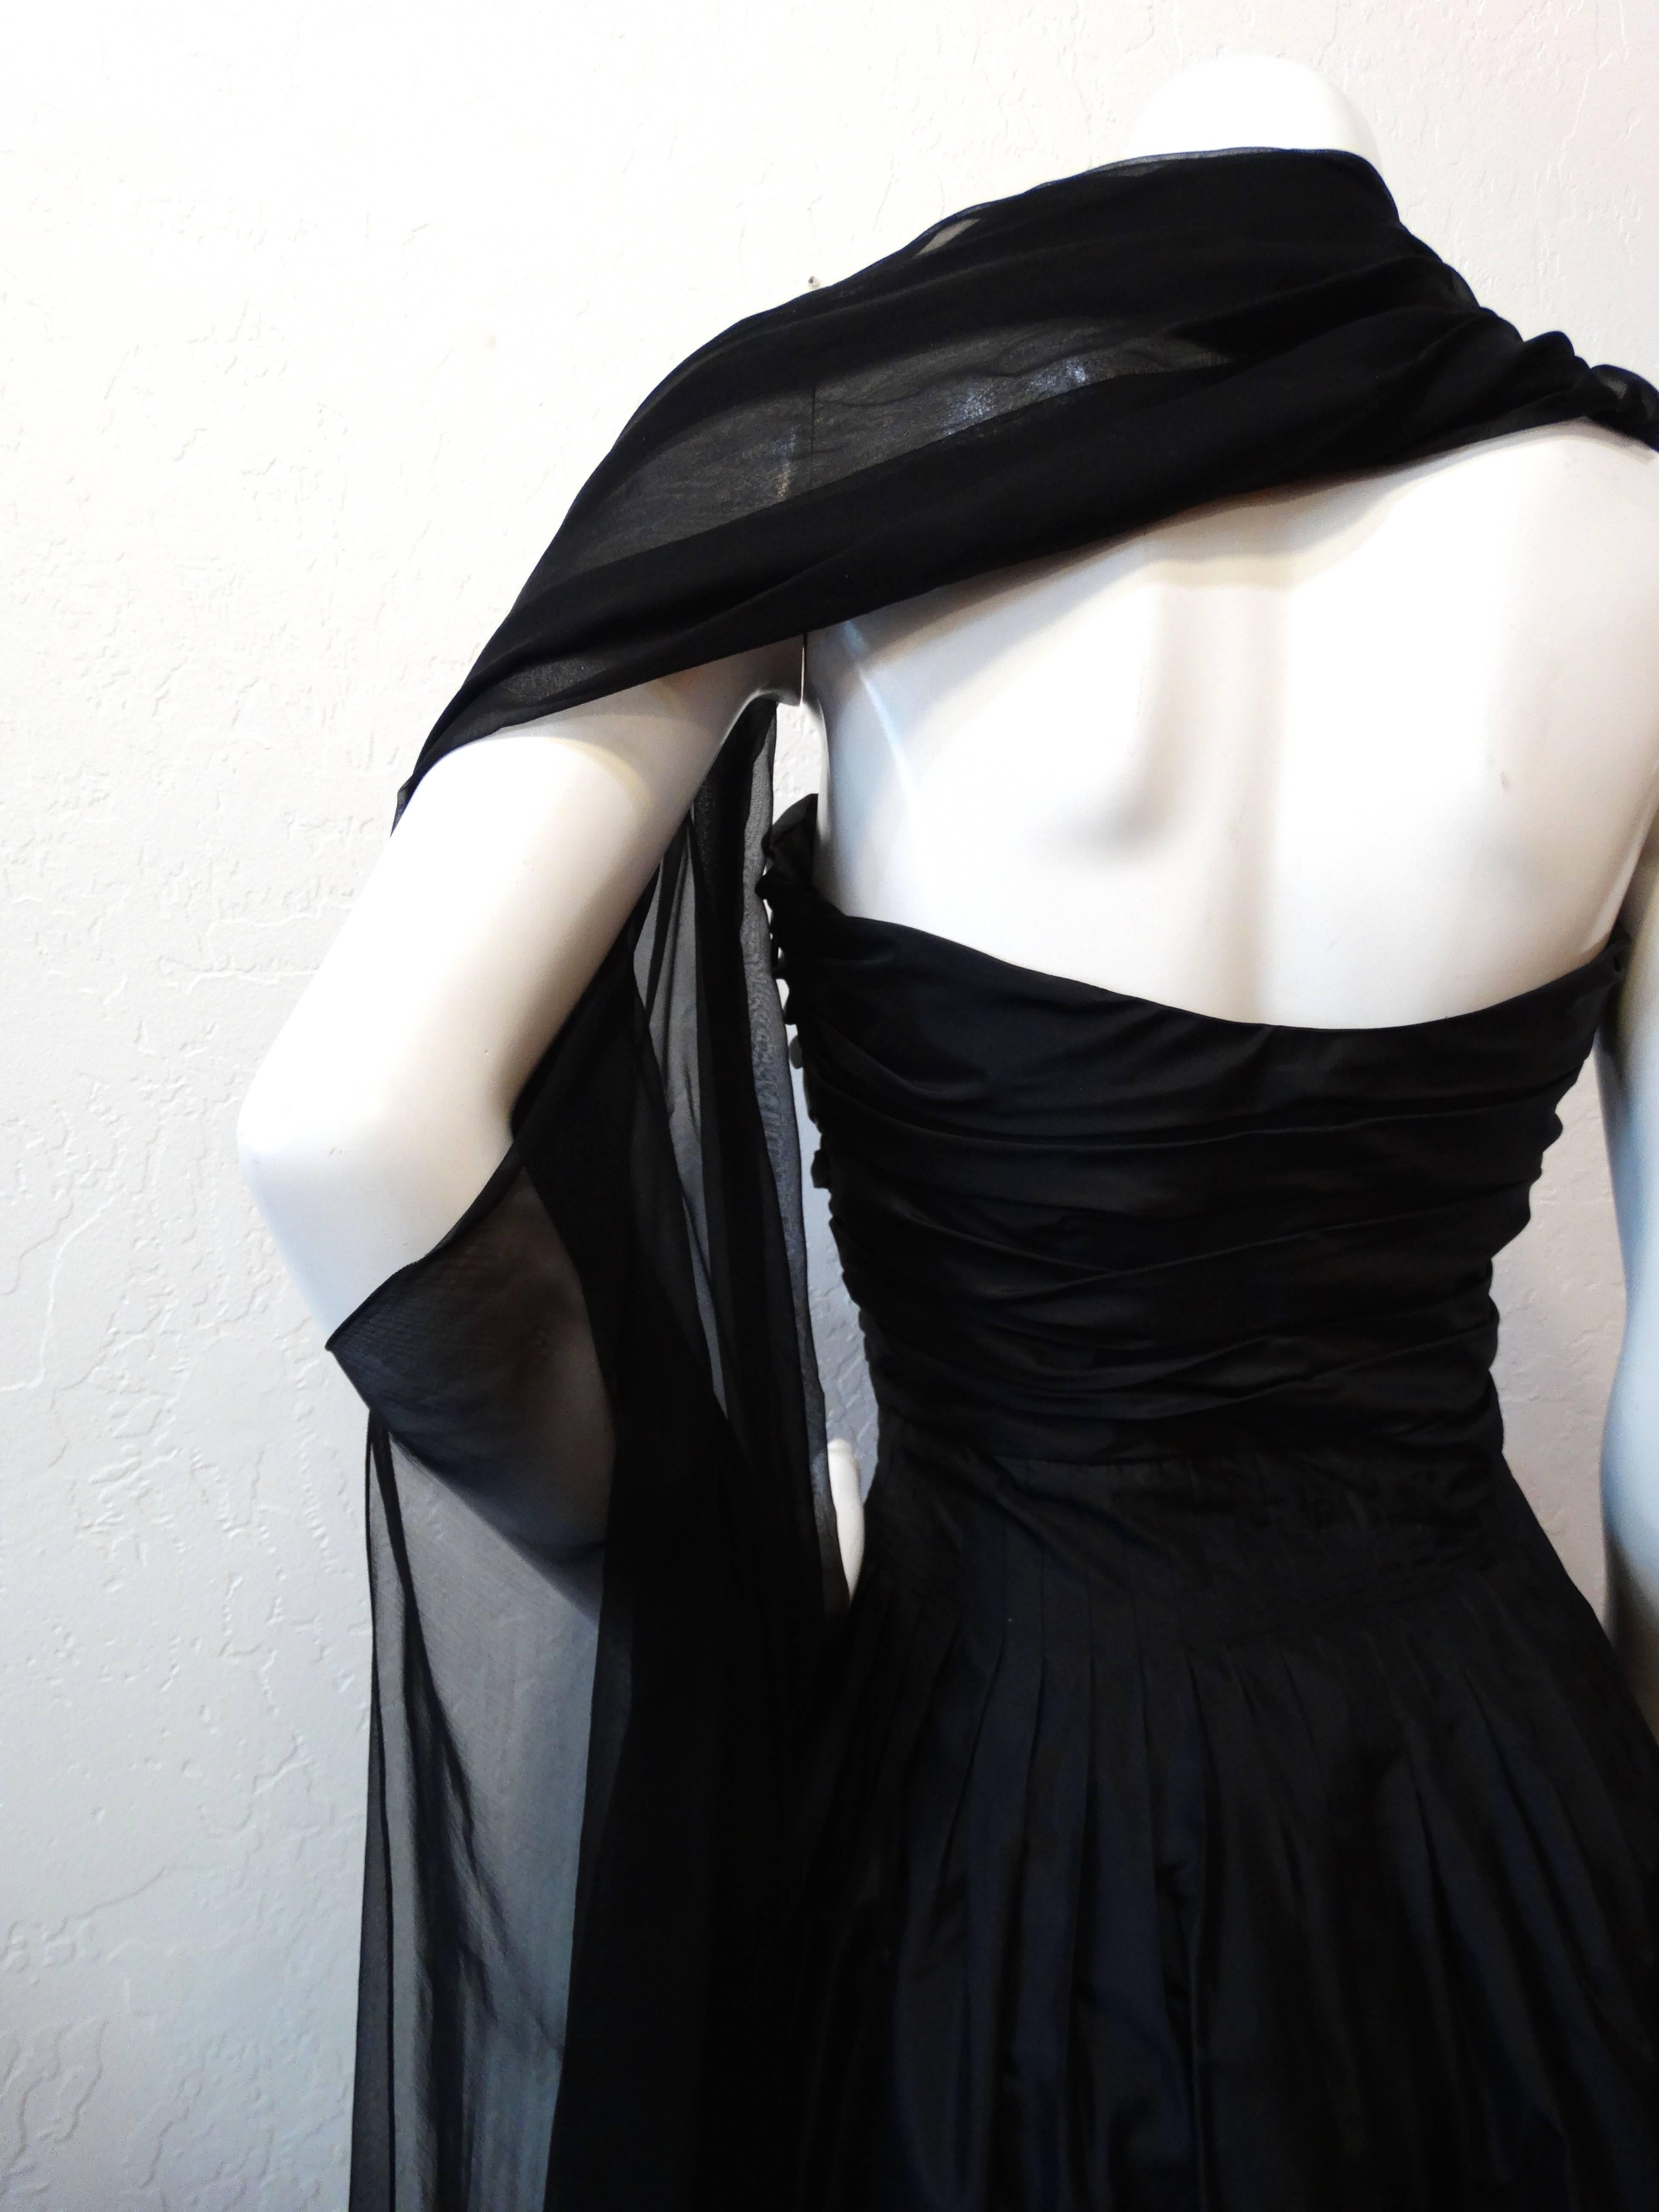 Moschino Pin-Tuck Gown With Built-in Shawl  In Excellent Condition For Sale In Scottsdale, AZ